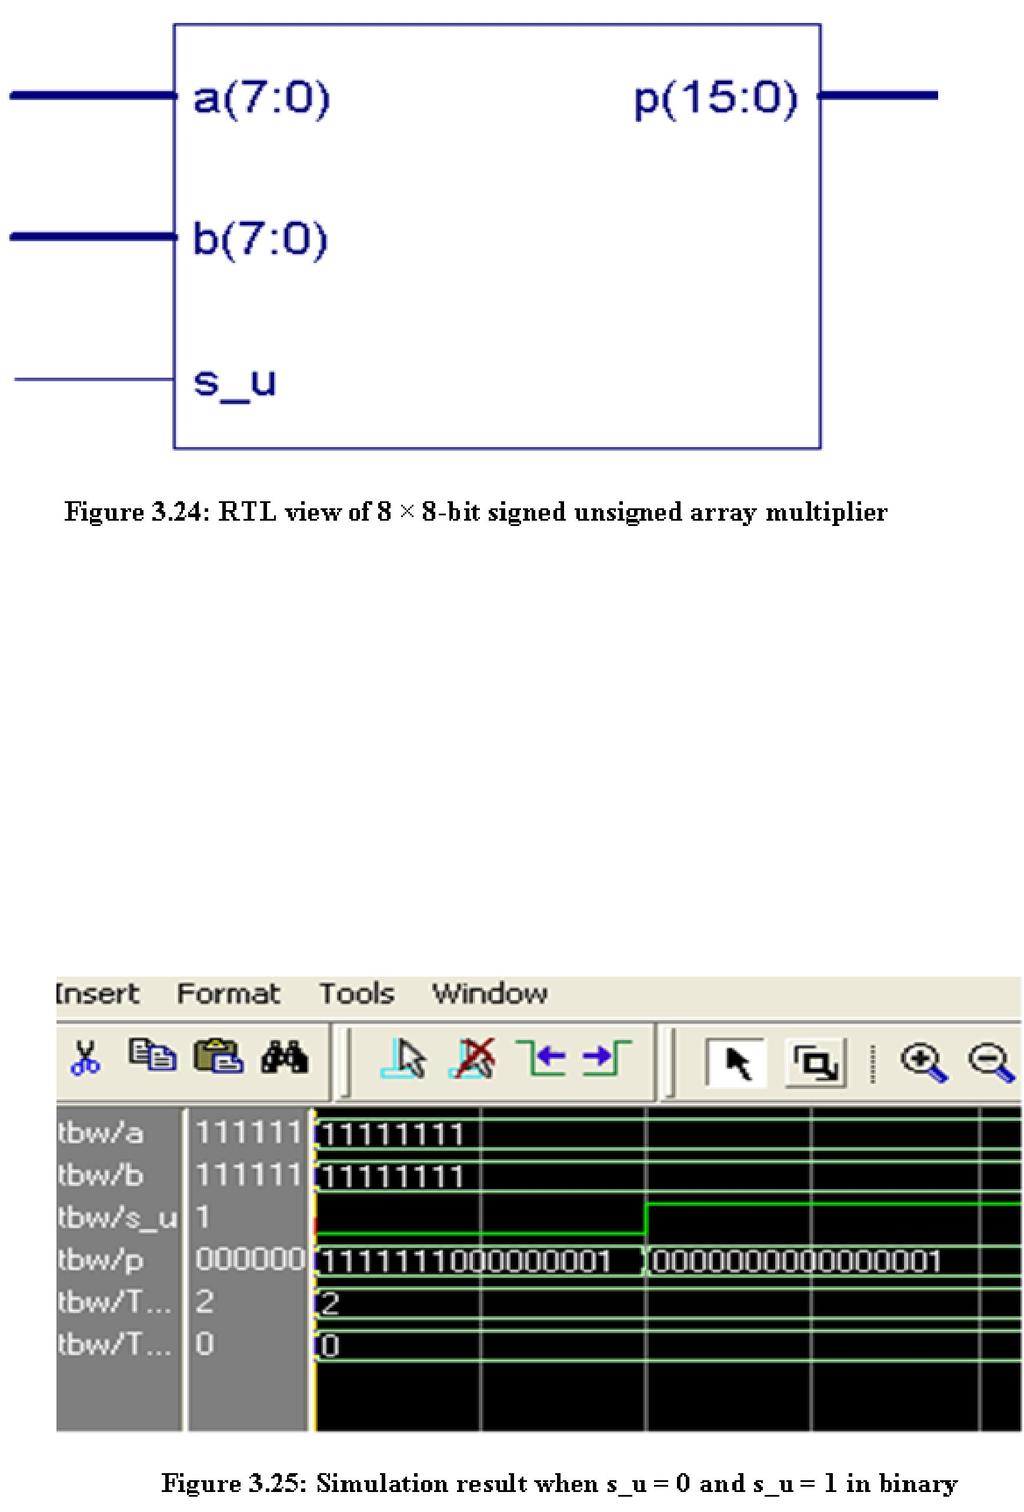 Figure 3.25 shows the simulation result of an 8-bit multiplier.